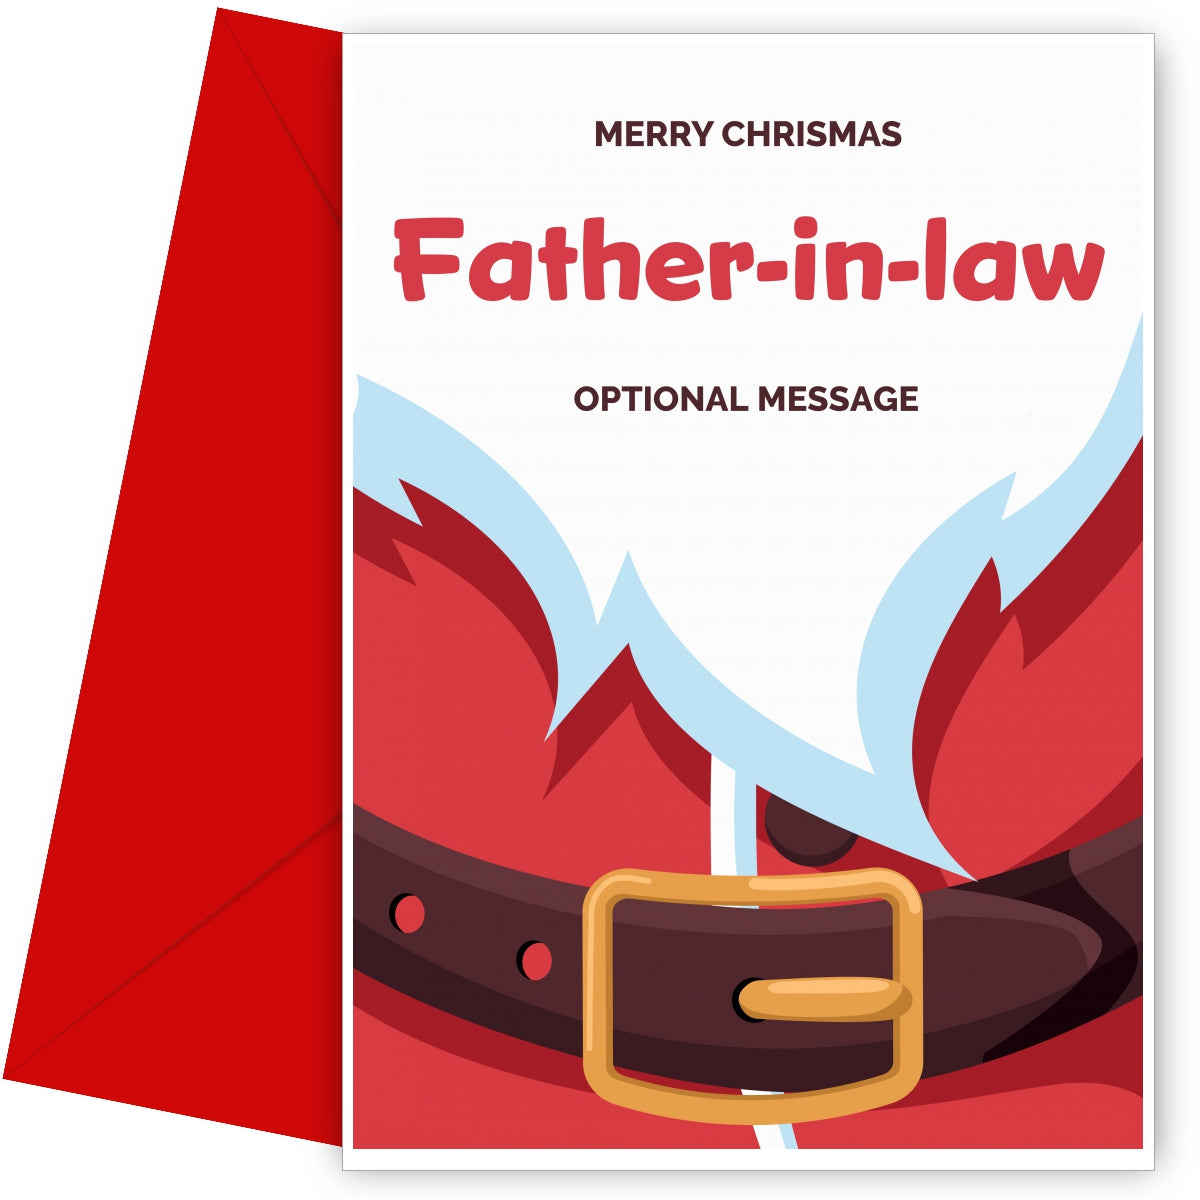 Merry Christmas Card for Father-in-law - Santa Belt